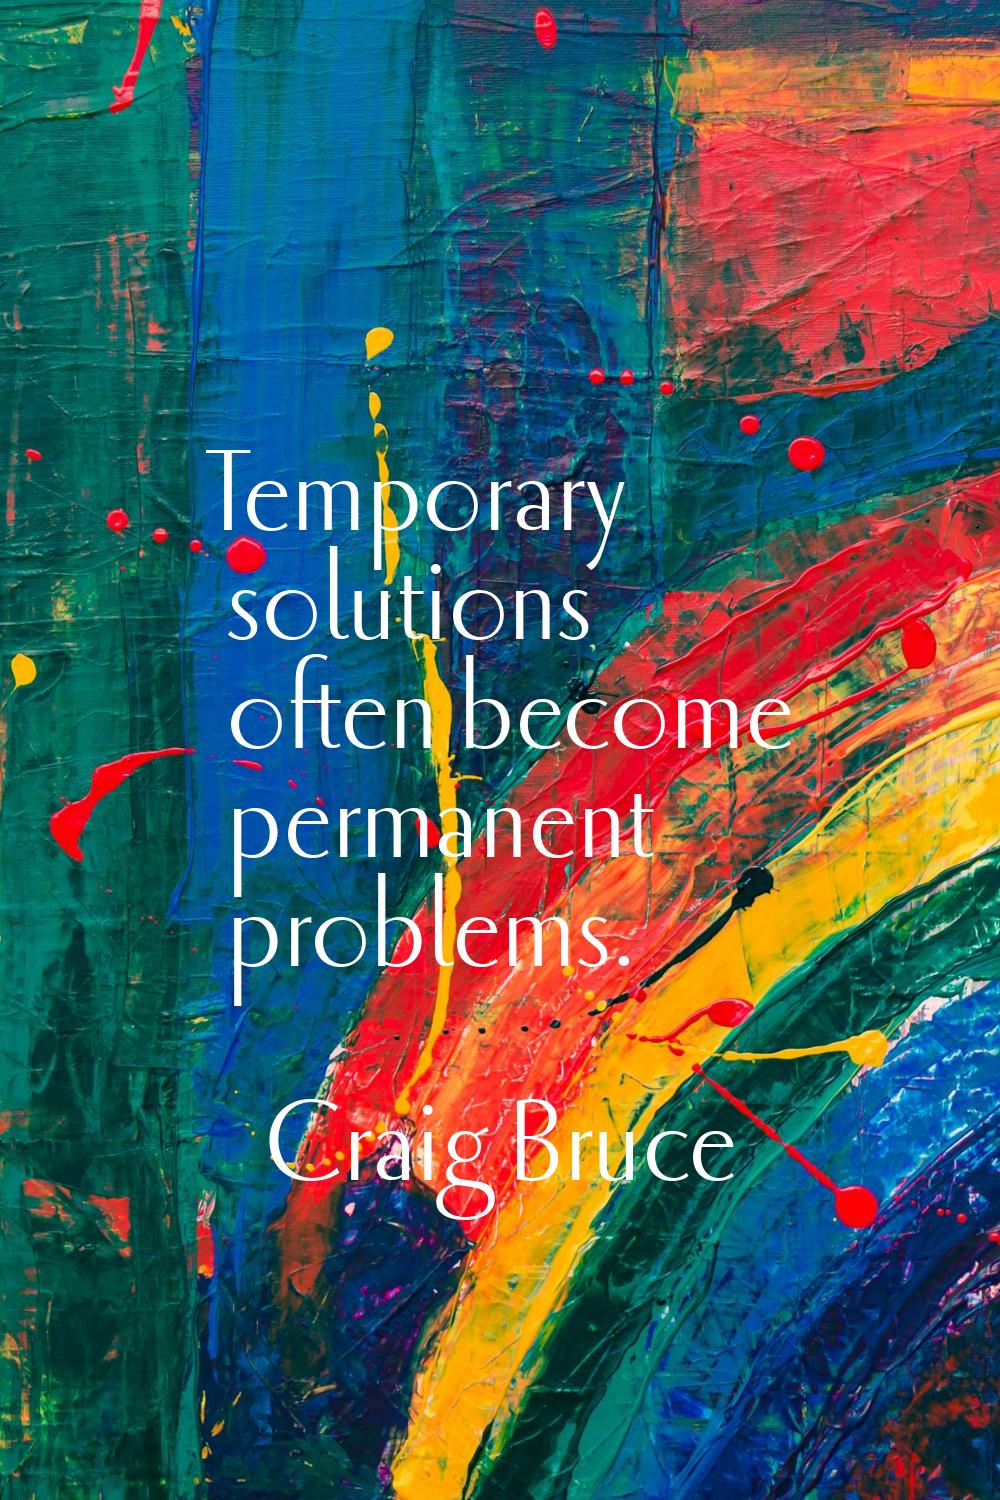 Temporary solutions often become permanent problems.